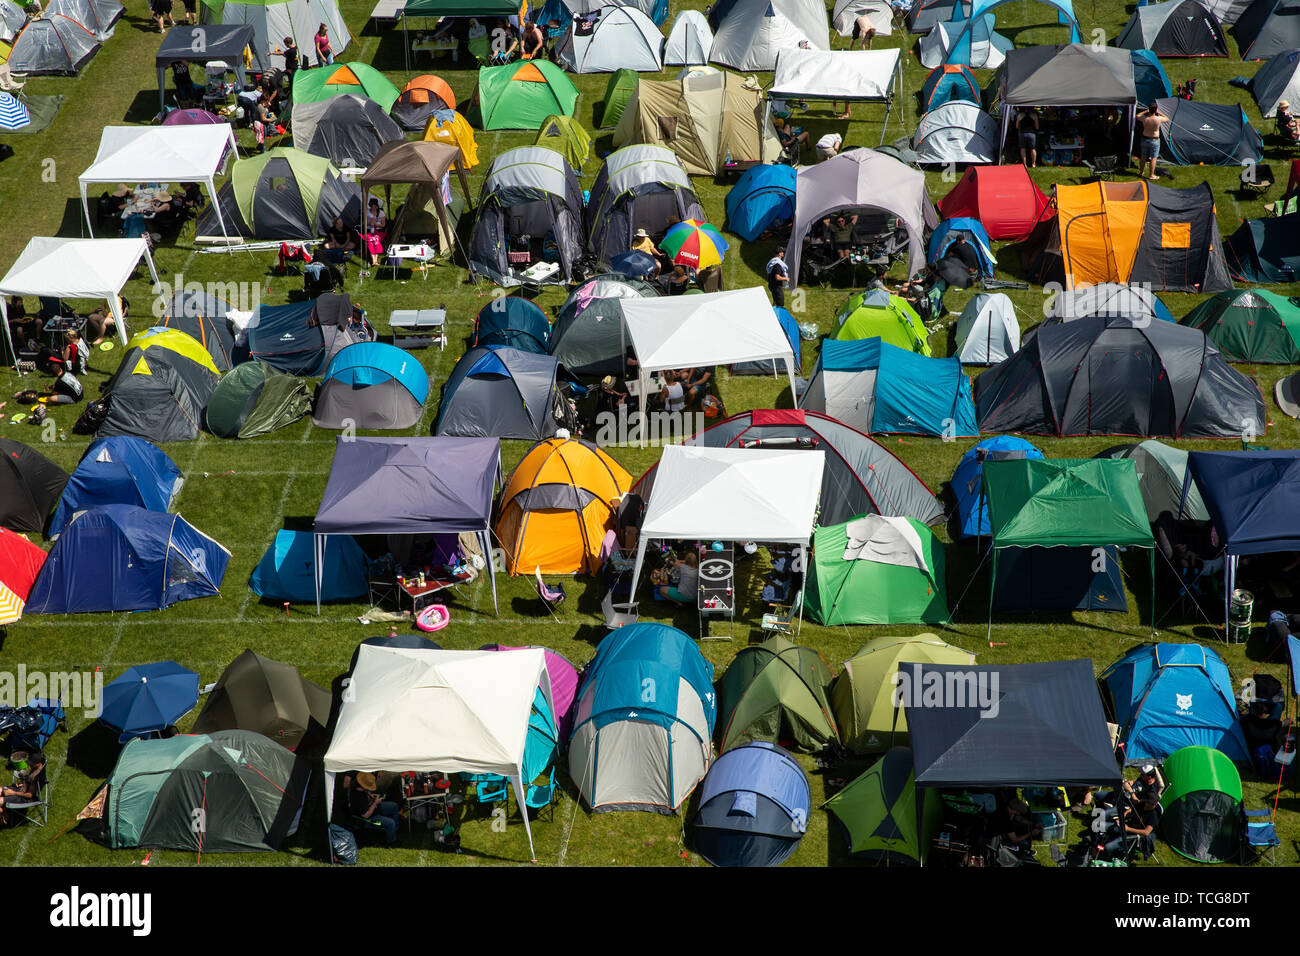 Nuremberg, Germany. 08th June, 2019. 08 June 2019, Bavaria, Nuremberg:  There are tents on a camping site at the open-air festival "Rock im Park".  The music festival runs until 9 June 2019.